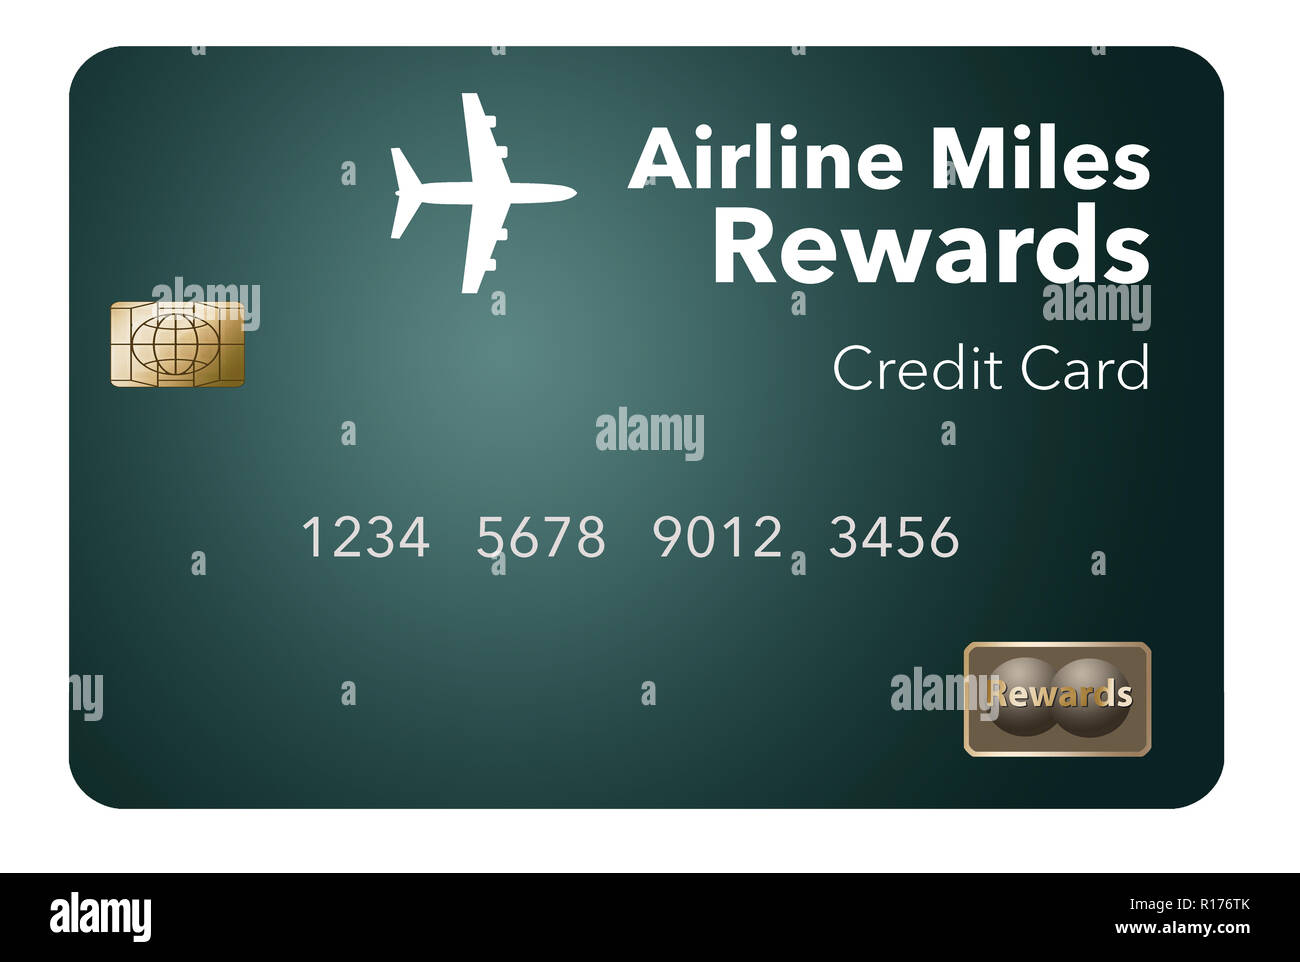 Airline Credit Card Stock Photos & Airline Credit Card